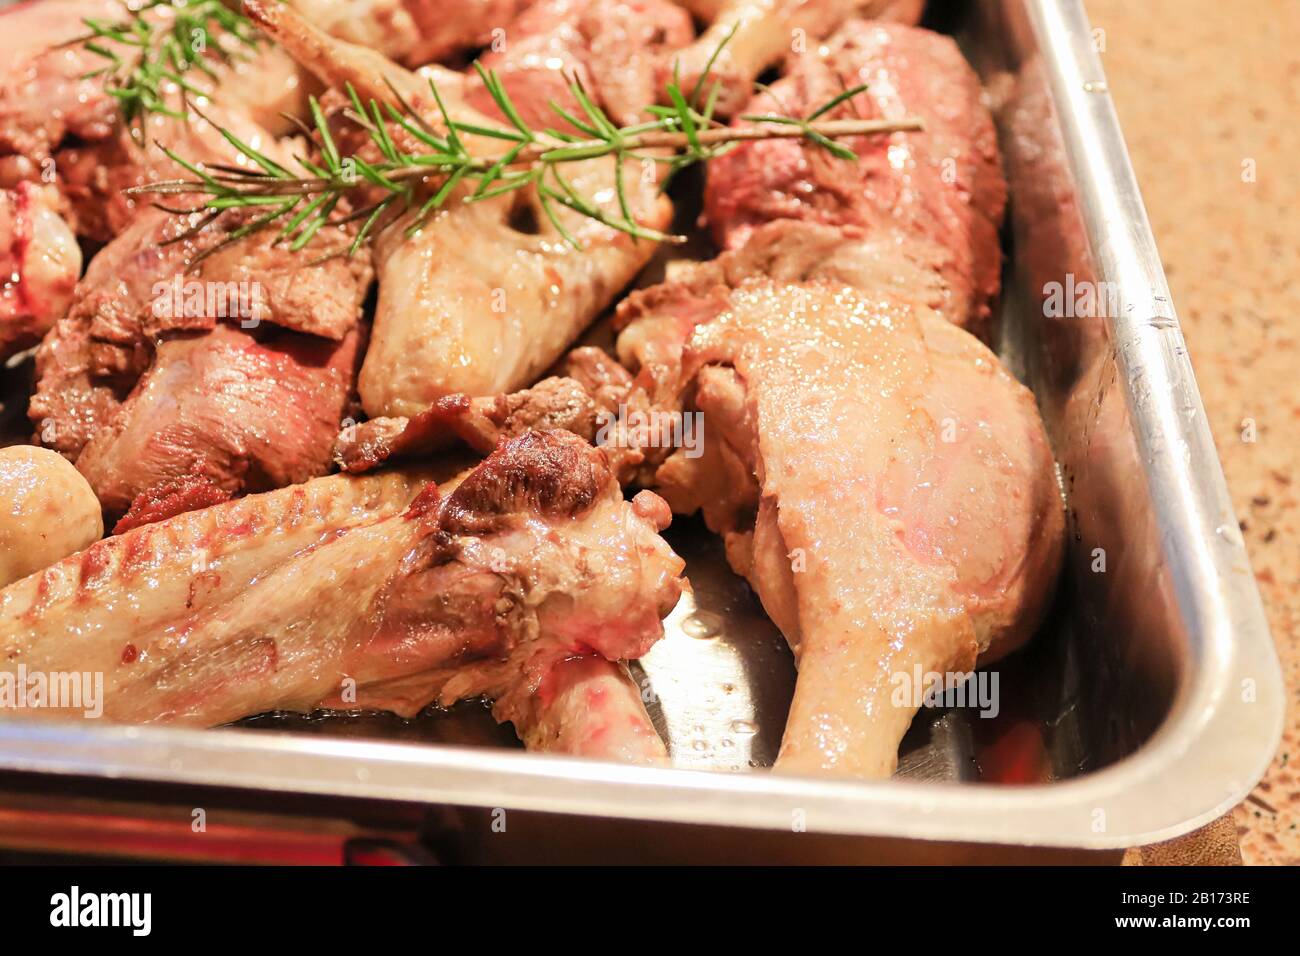 Closeup of cut up raw browned duck parts in a roating pan Stock Photo